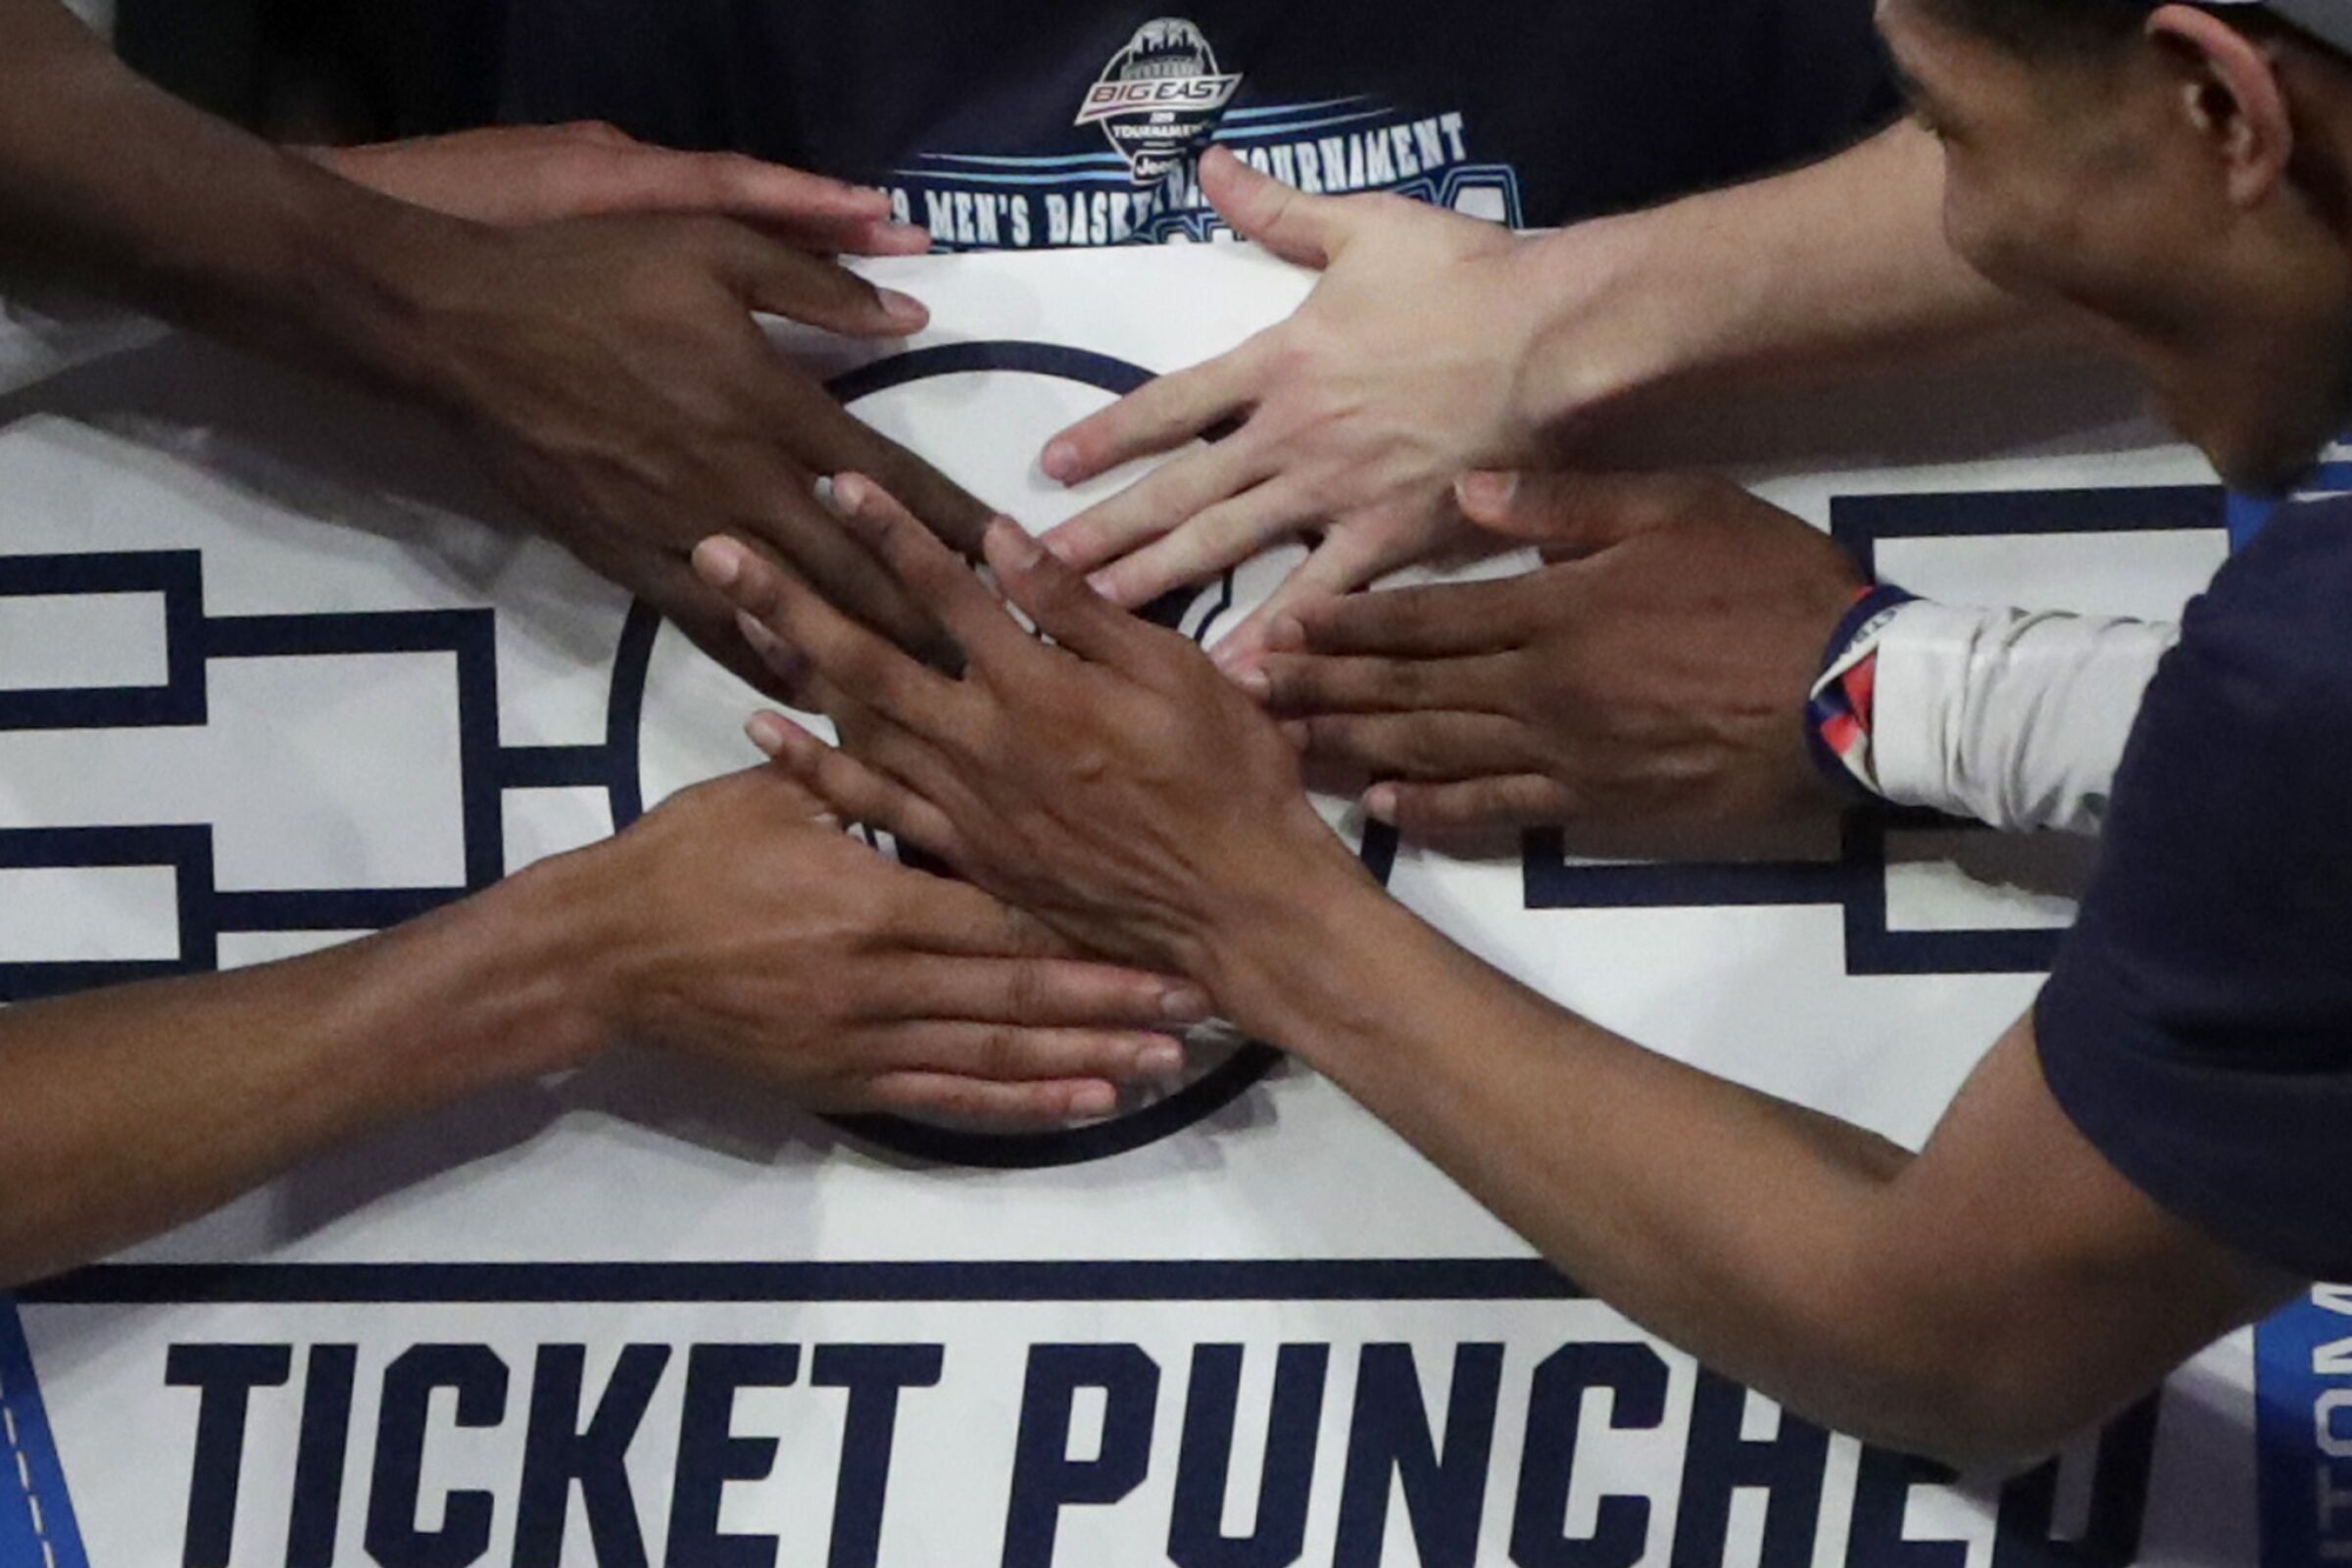 Villanova players stick a logo of their team on a bracket board after defeating Seton Hall in 2019.